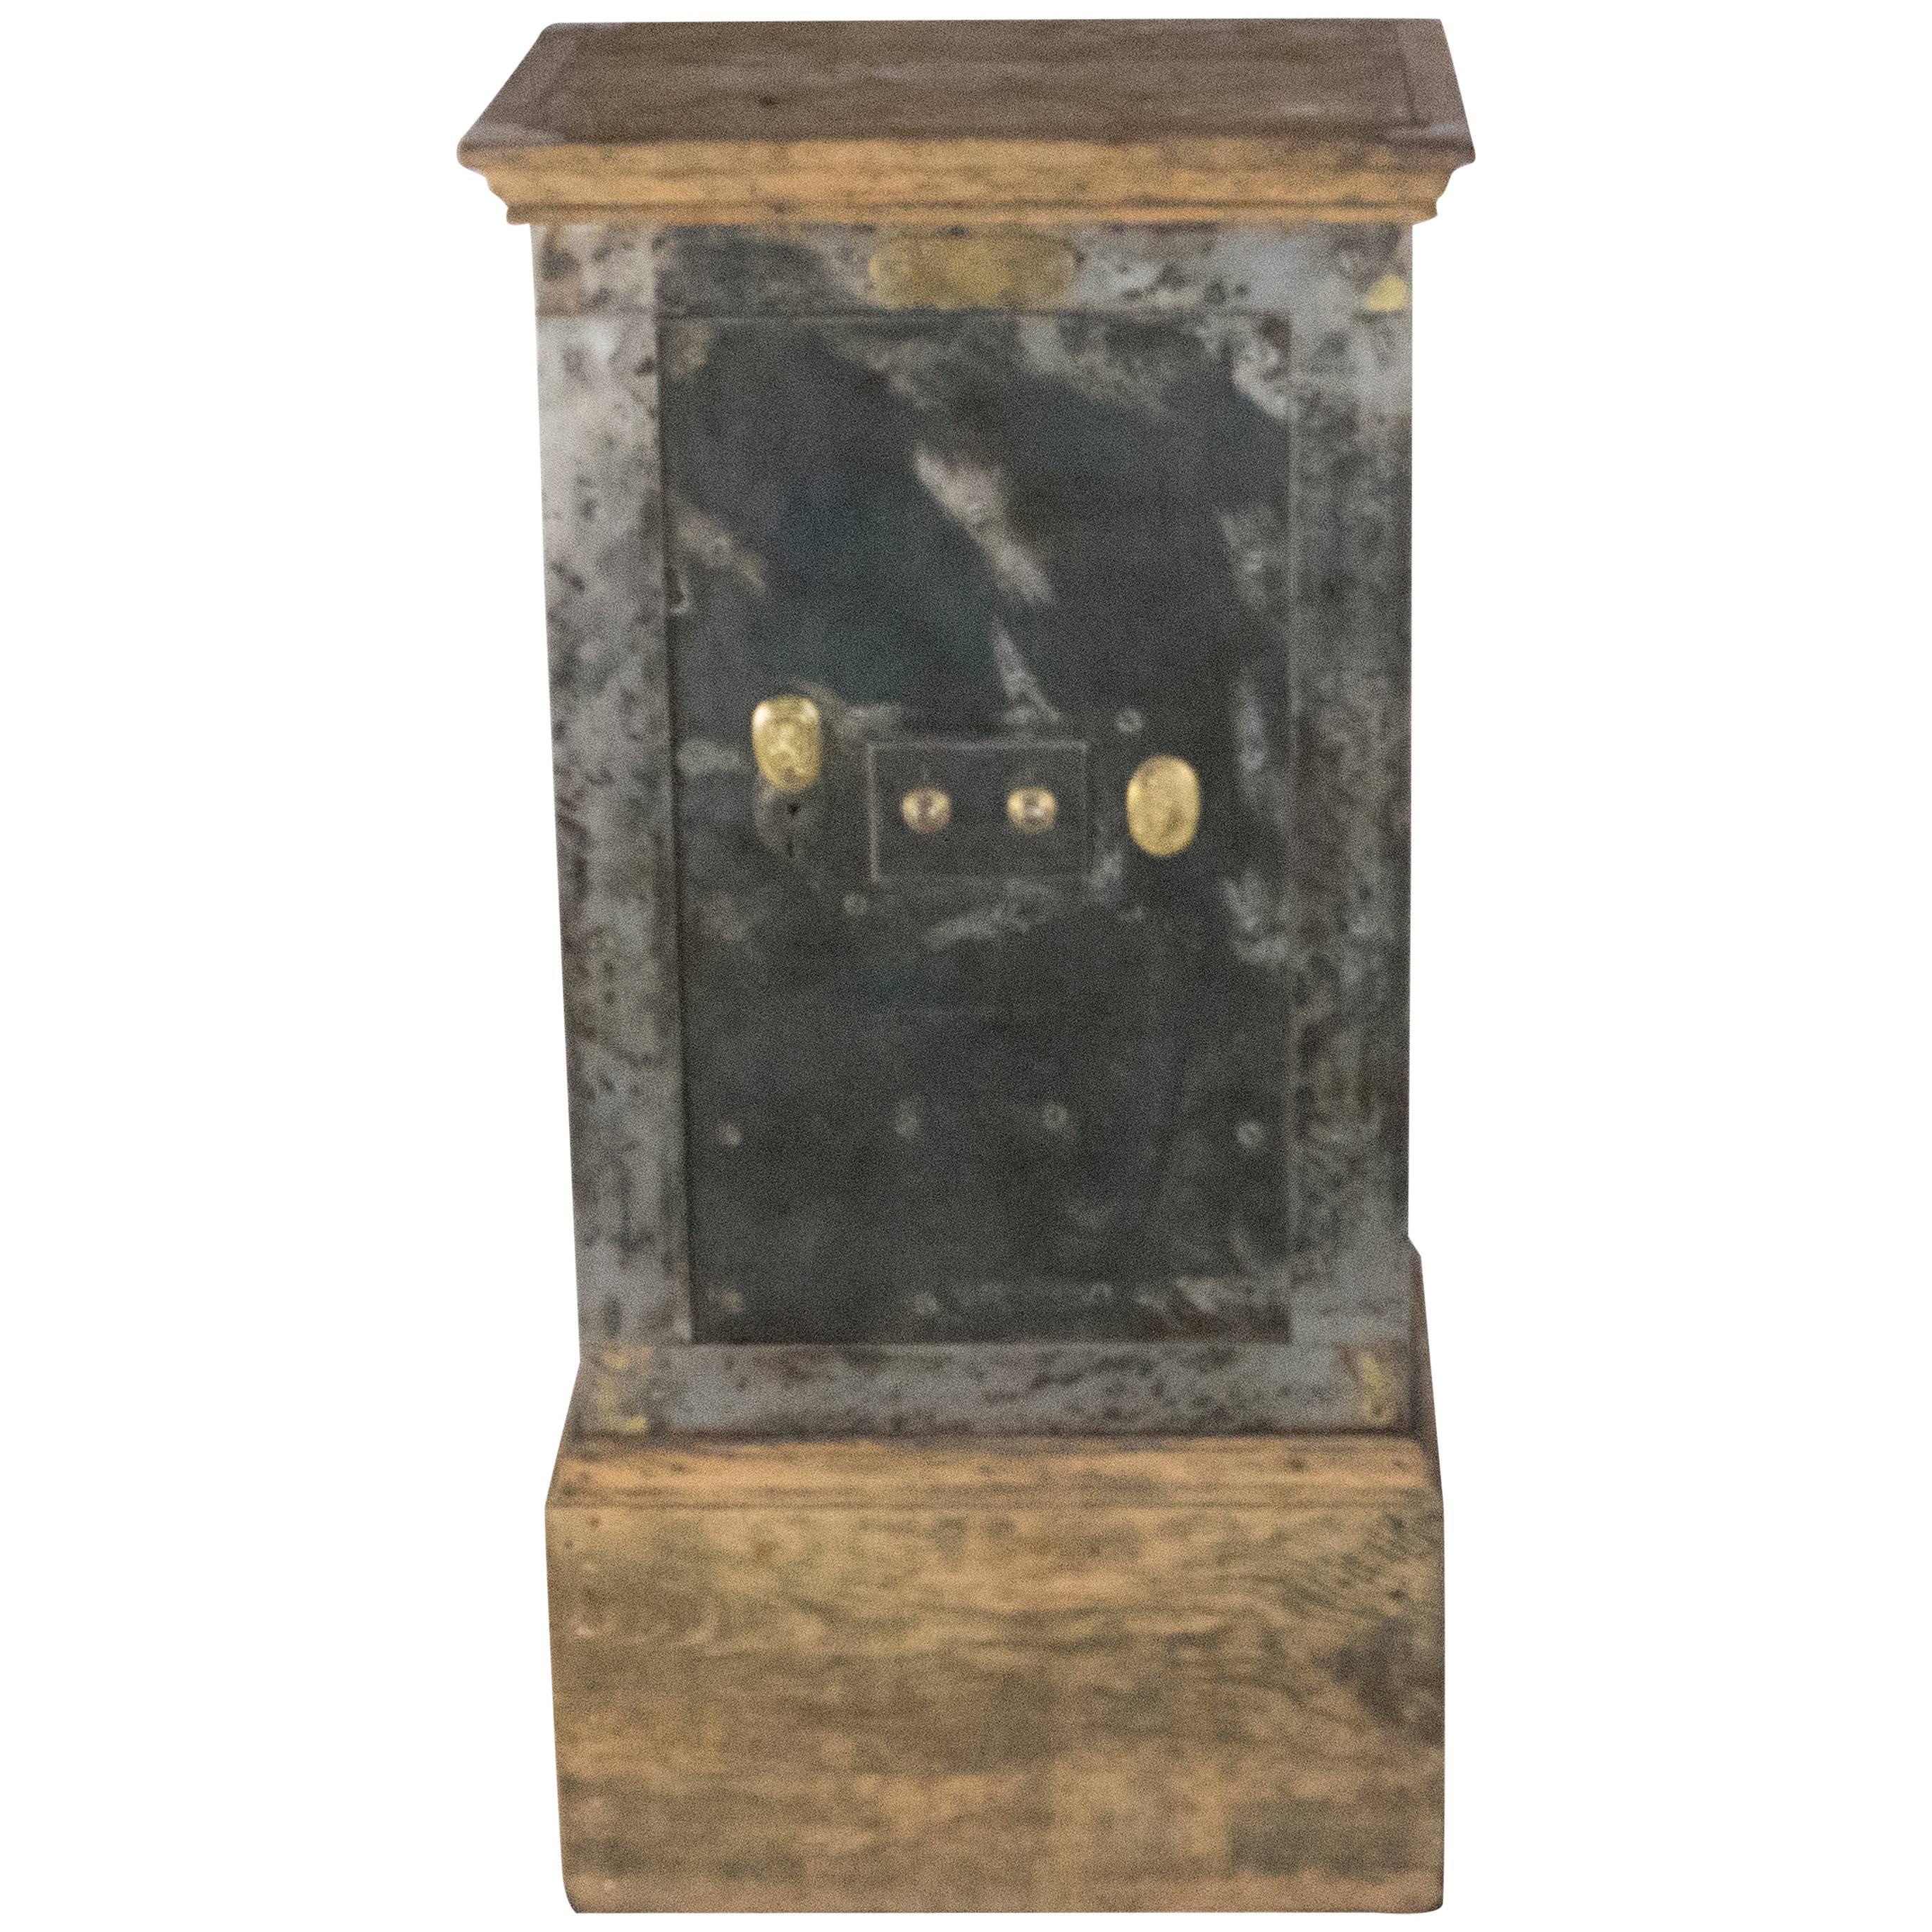 French Steel Safe by H. Dorval